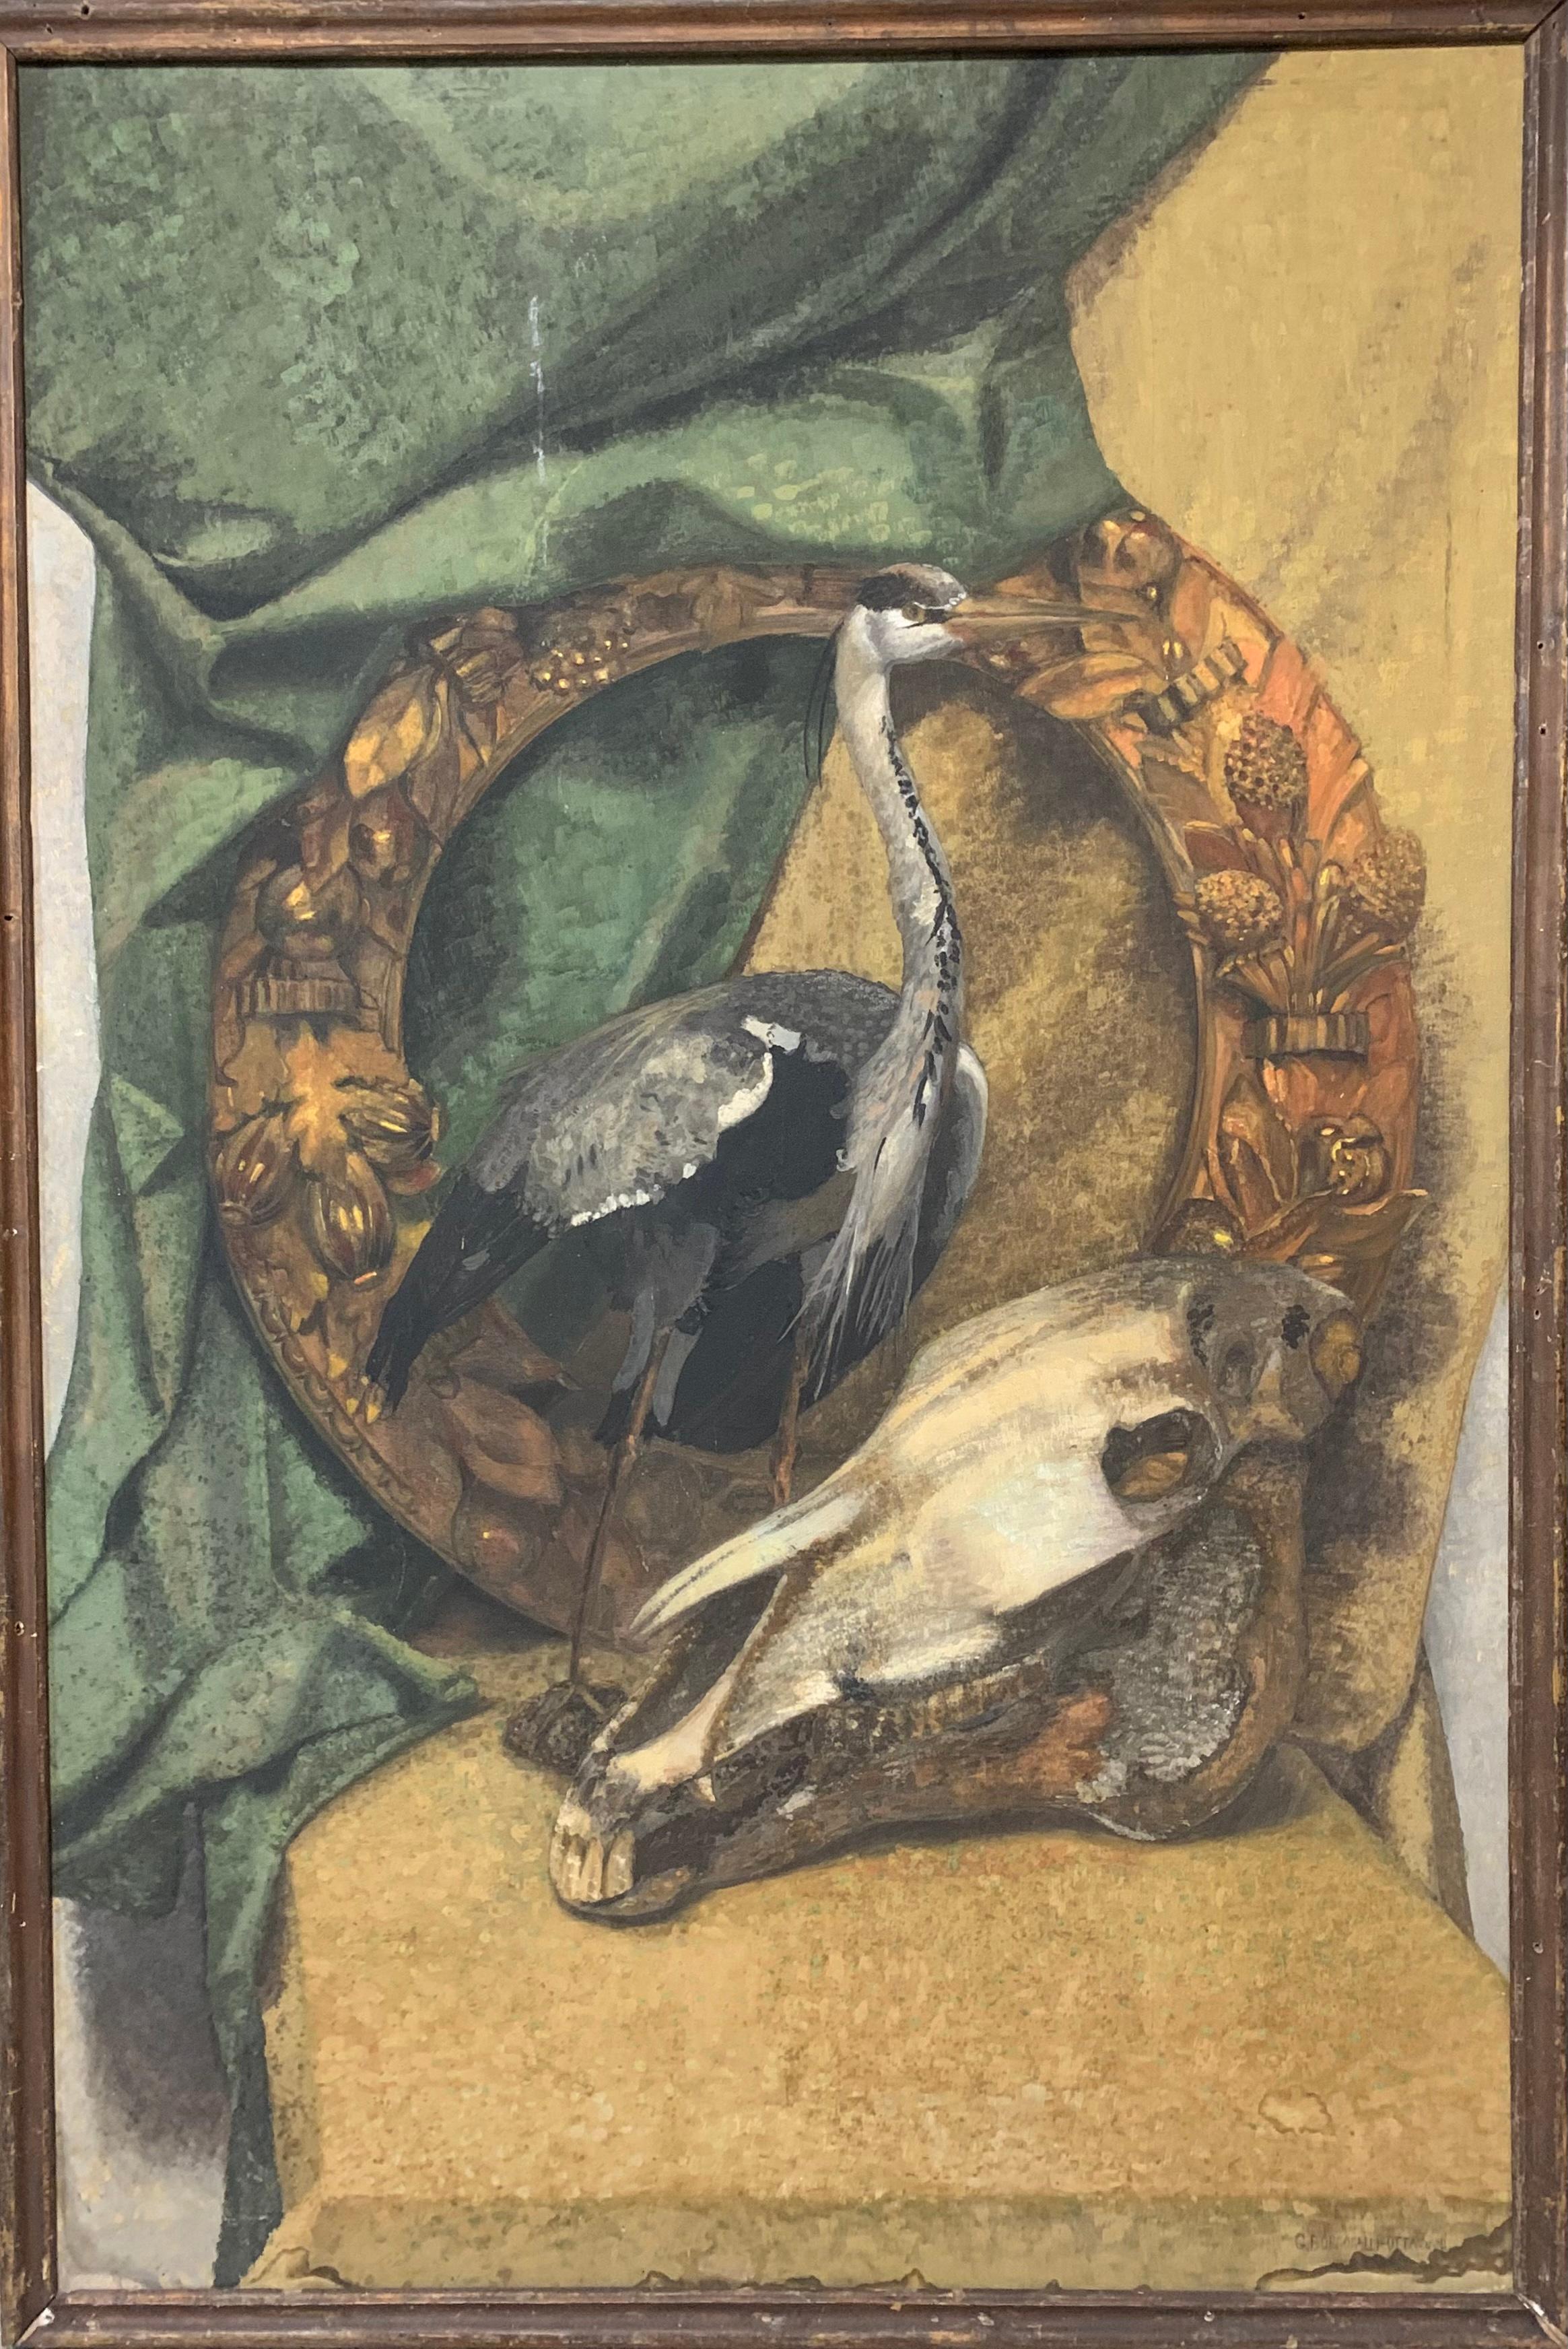 Memento mori, memento vive: Garland with Heron and skull. - Painting by Unknown